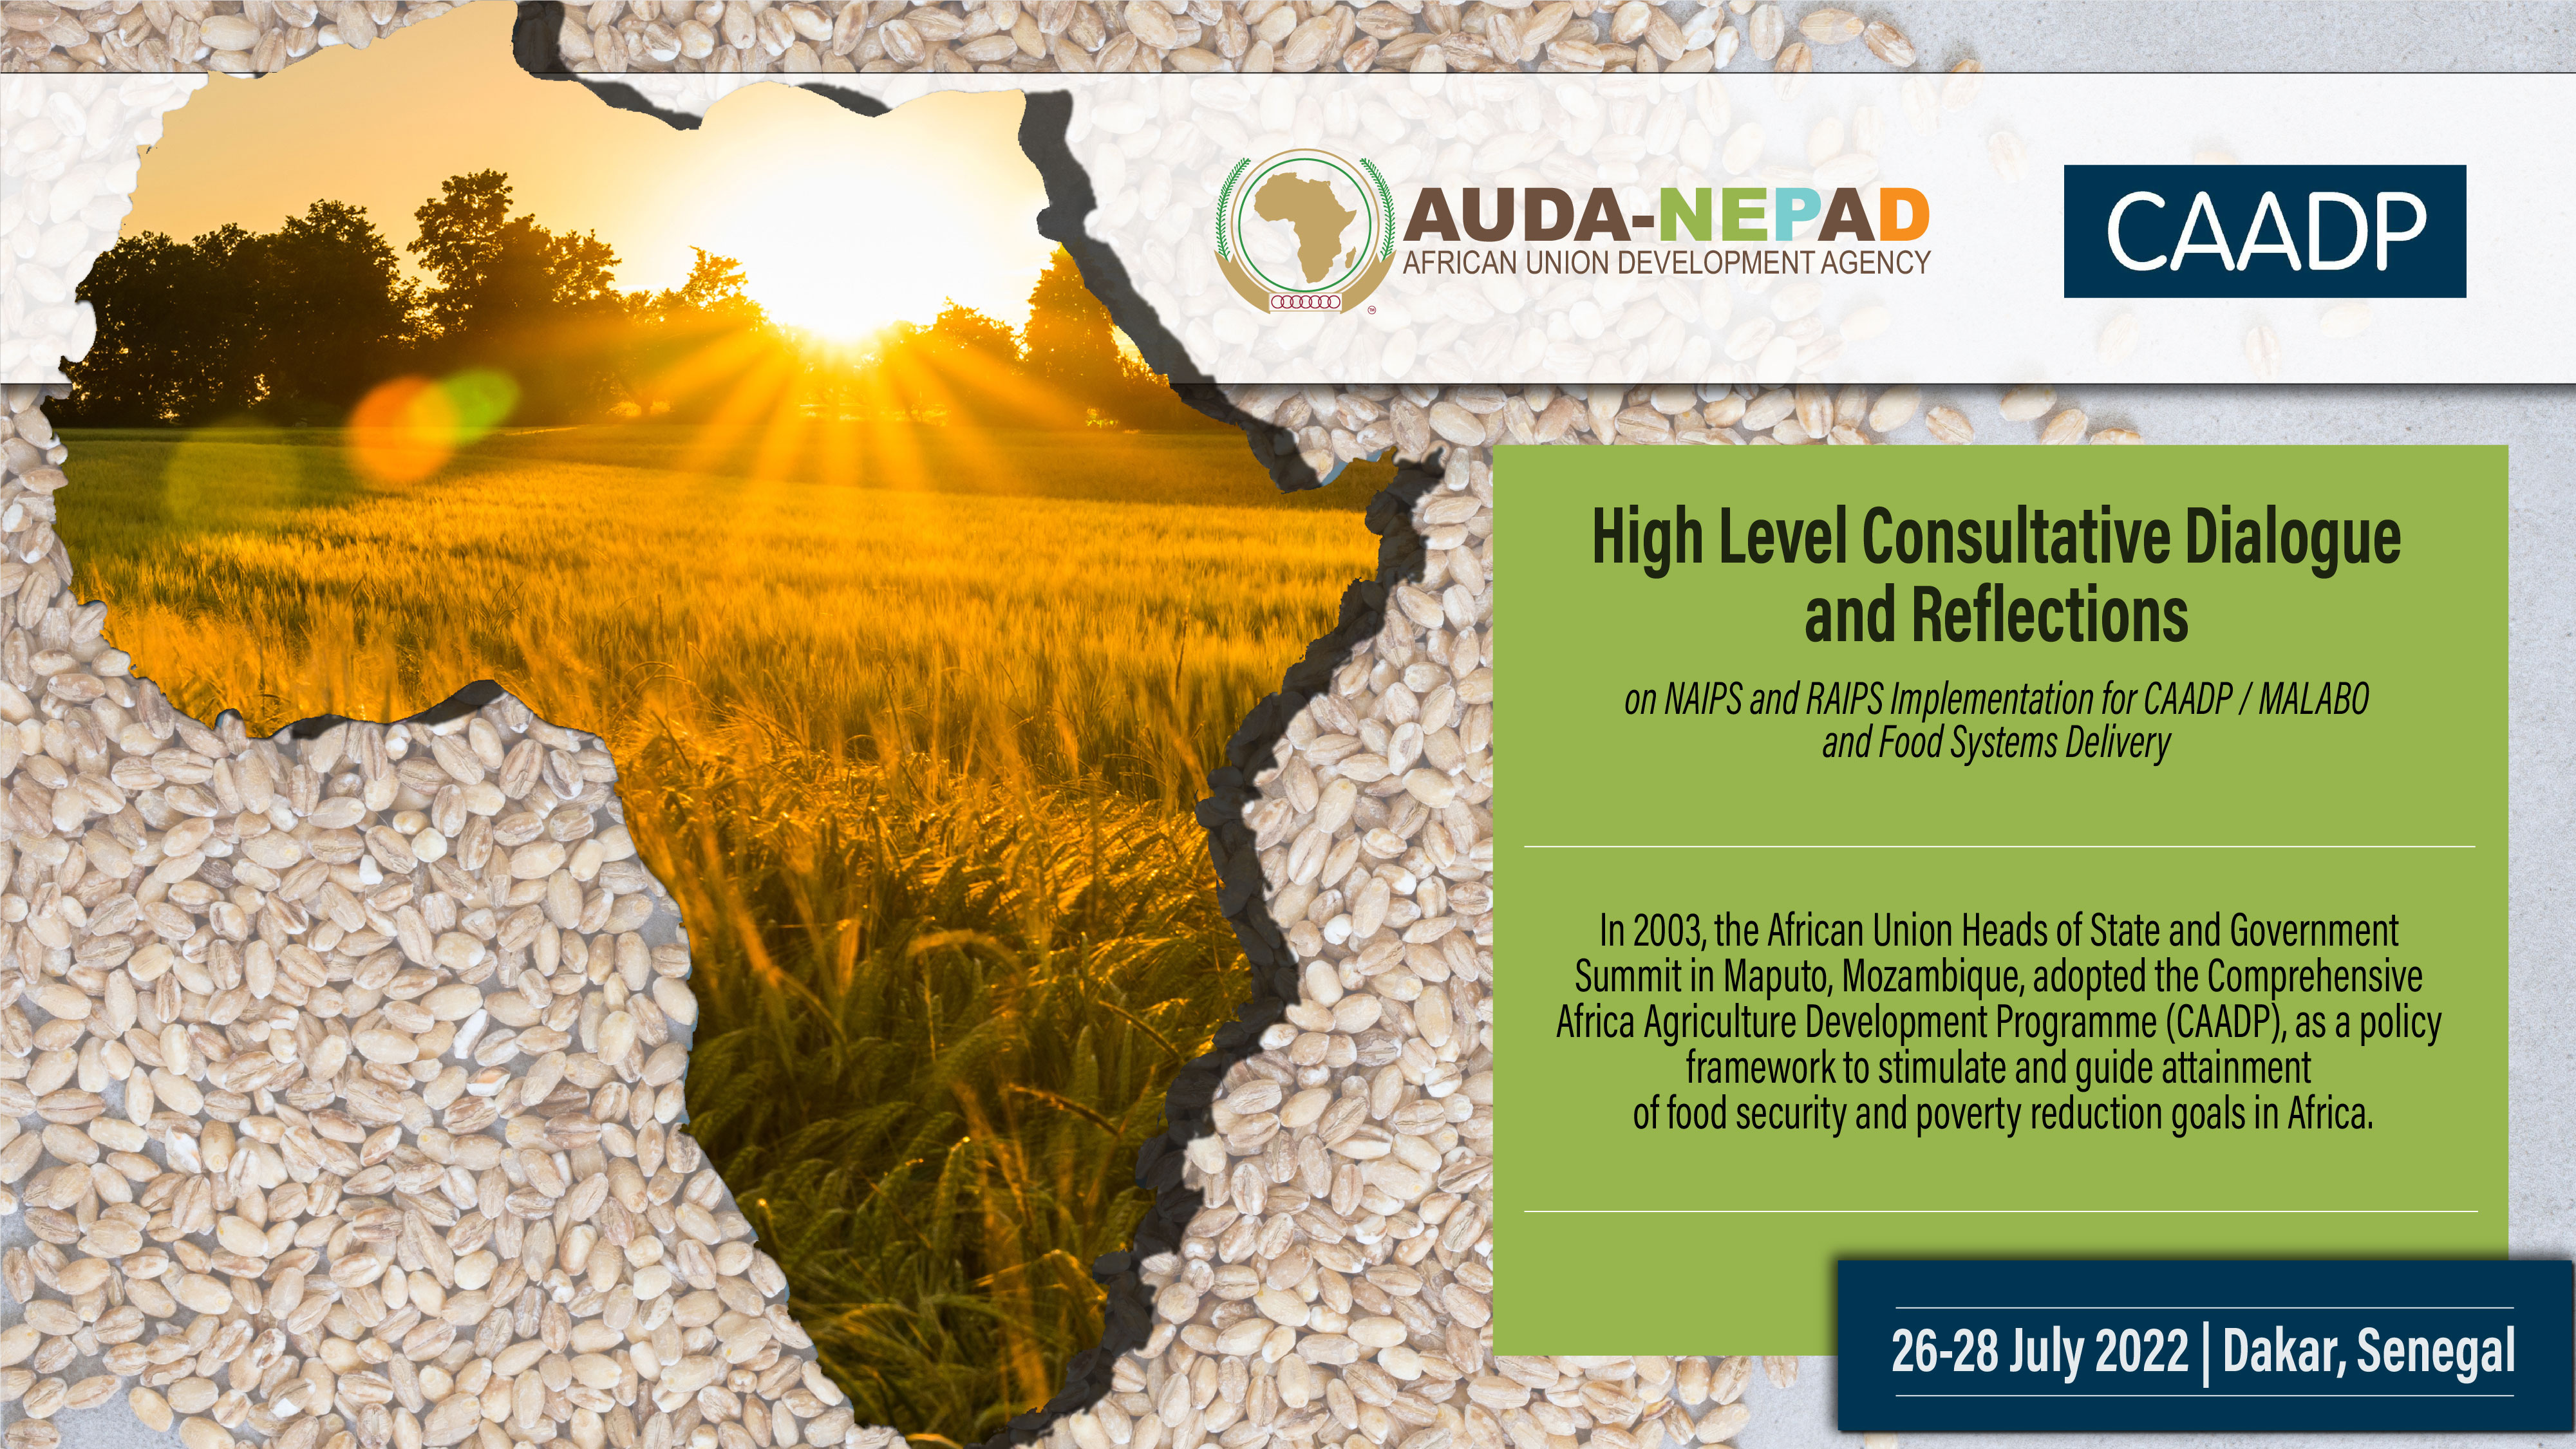 CAADP Key Messages 3